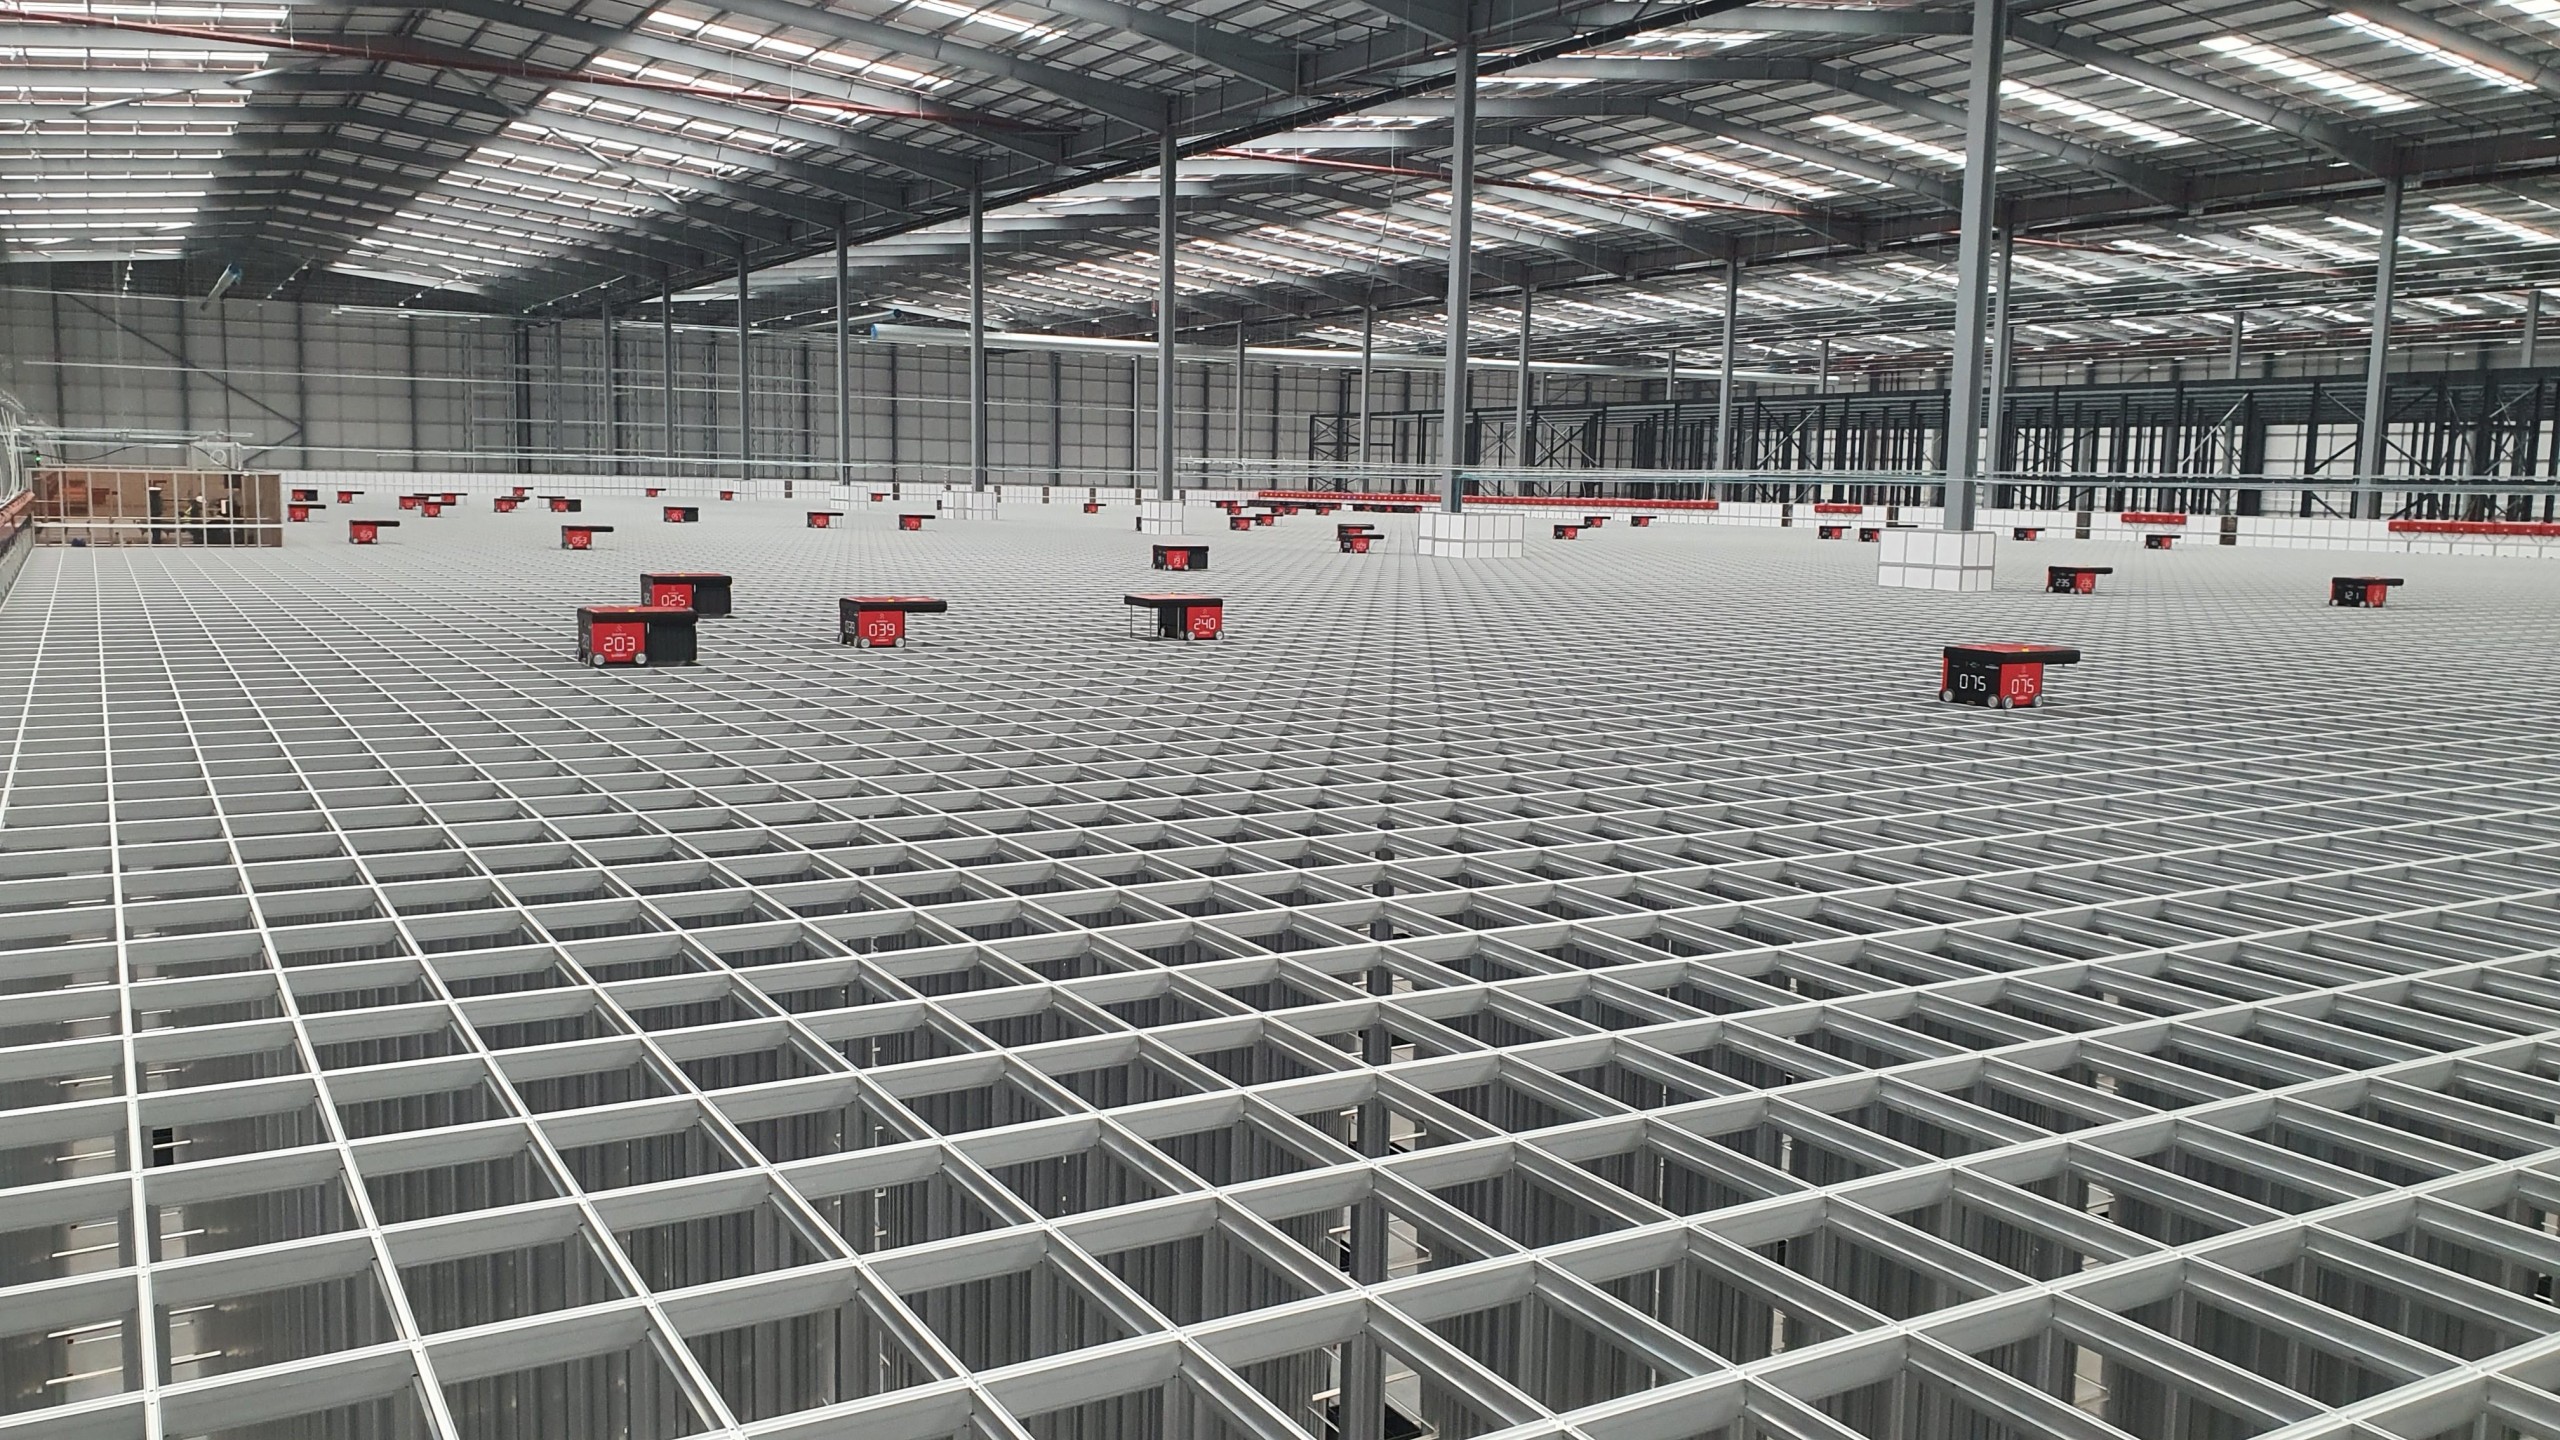 View of a warehouse using automated technology